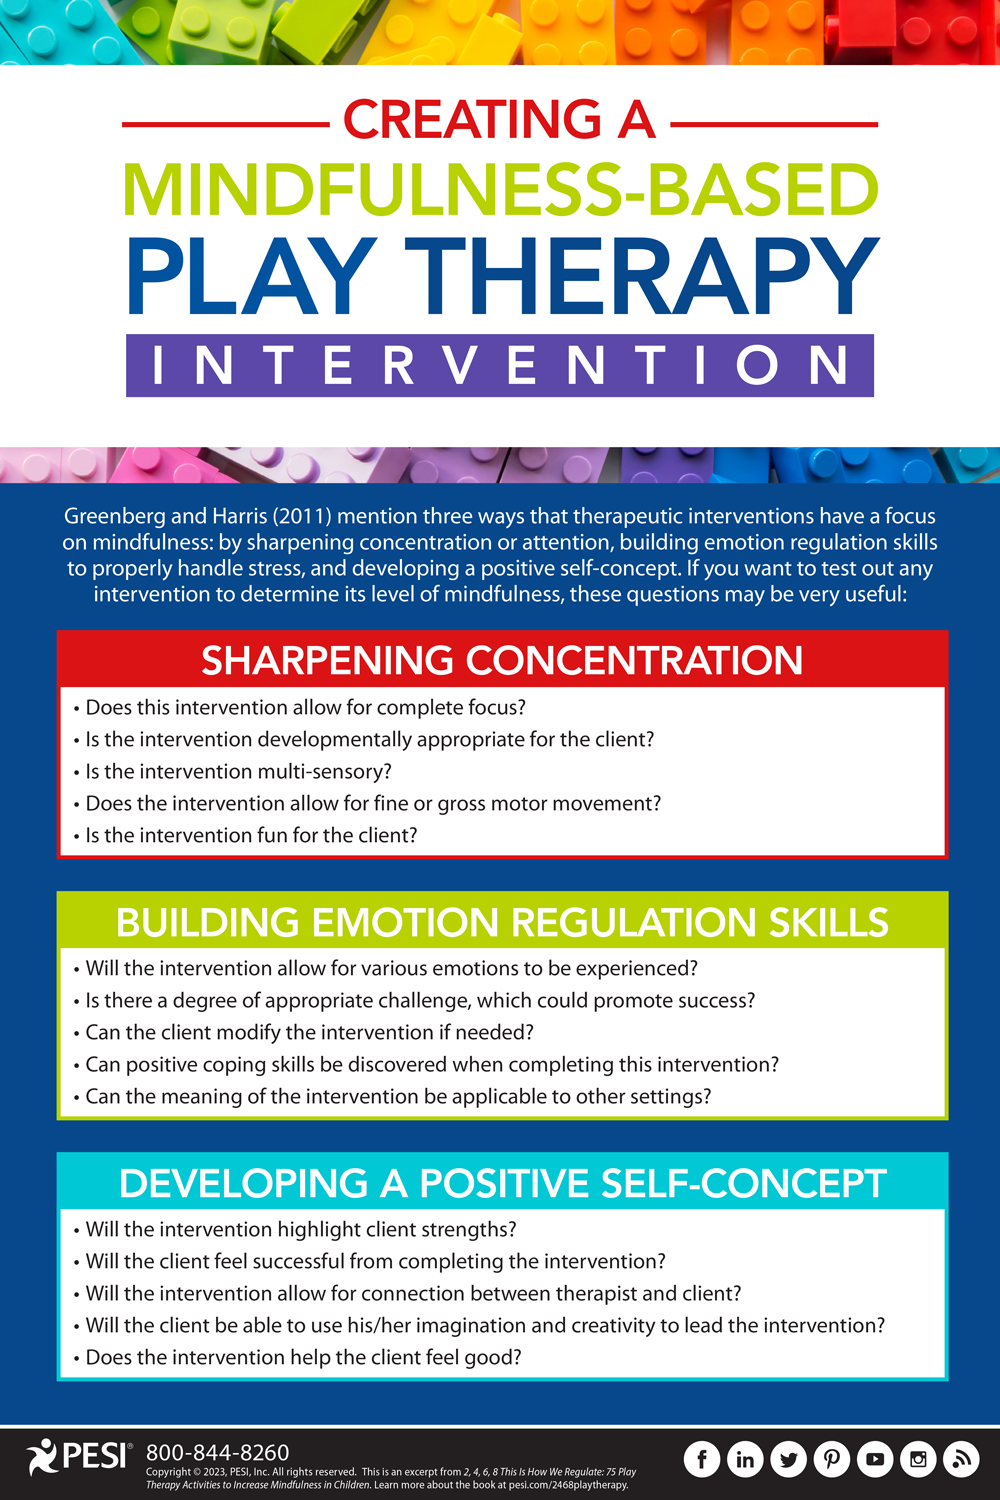 Play Therapy Infographic